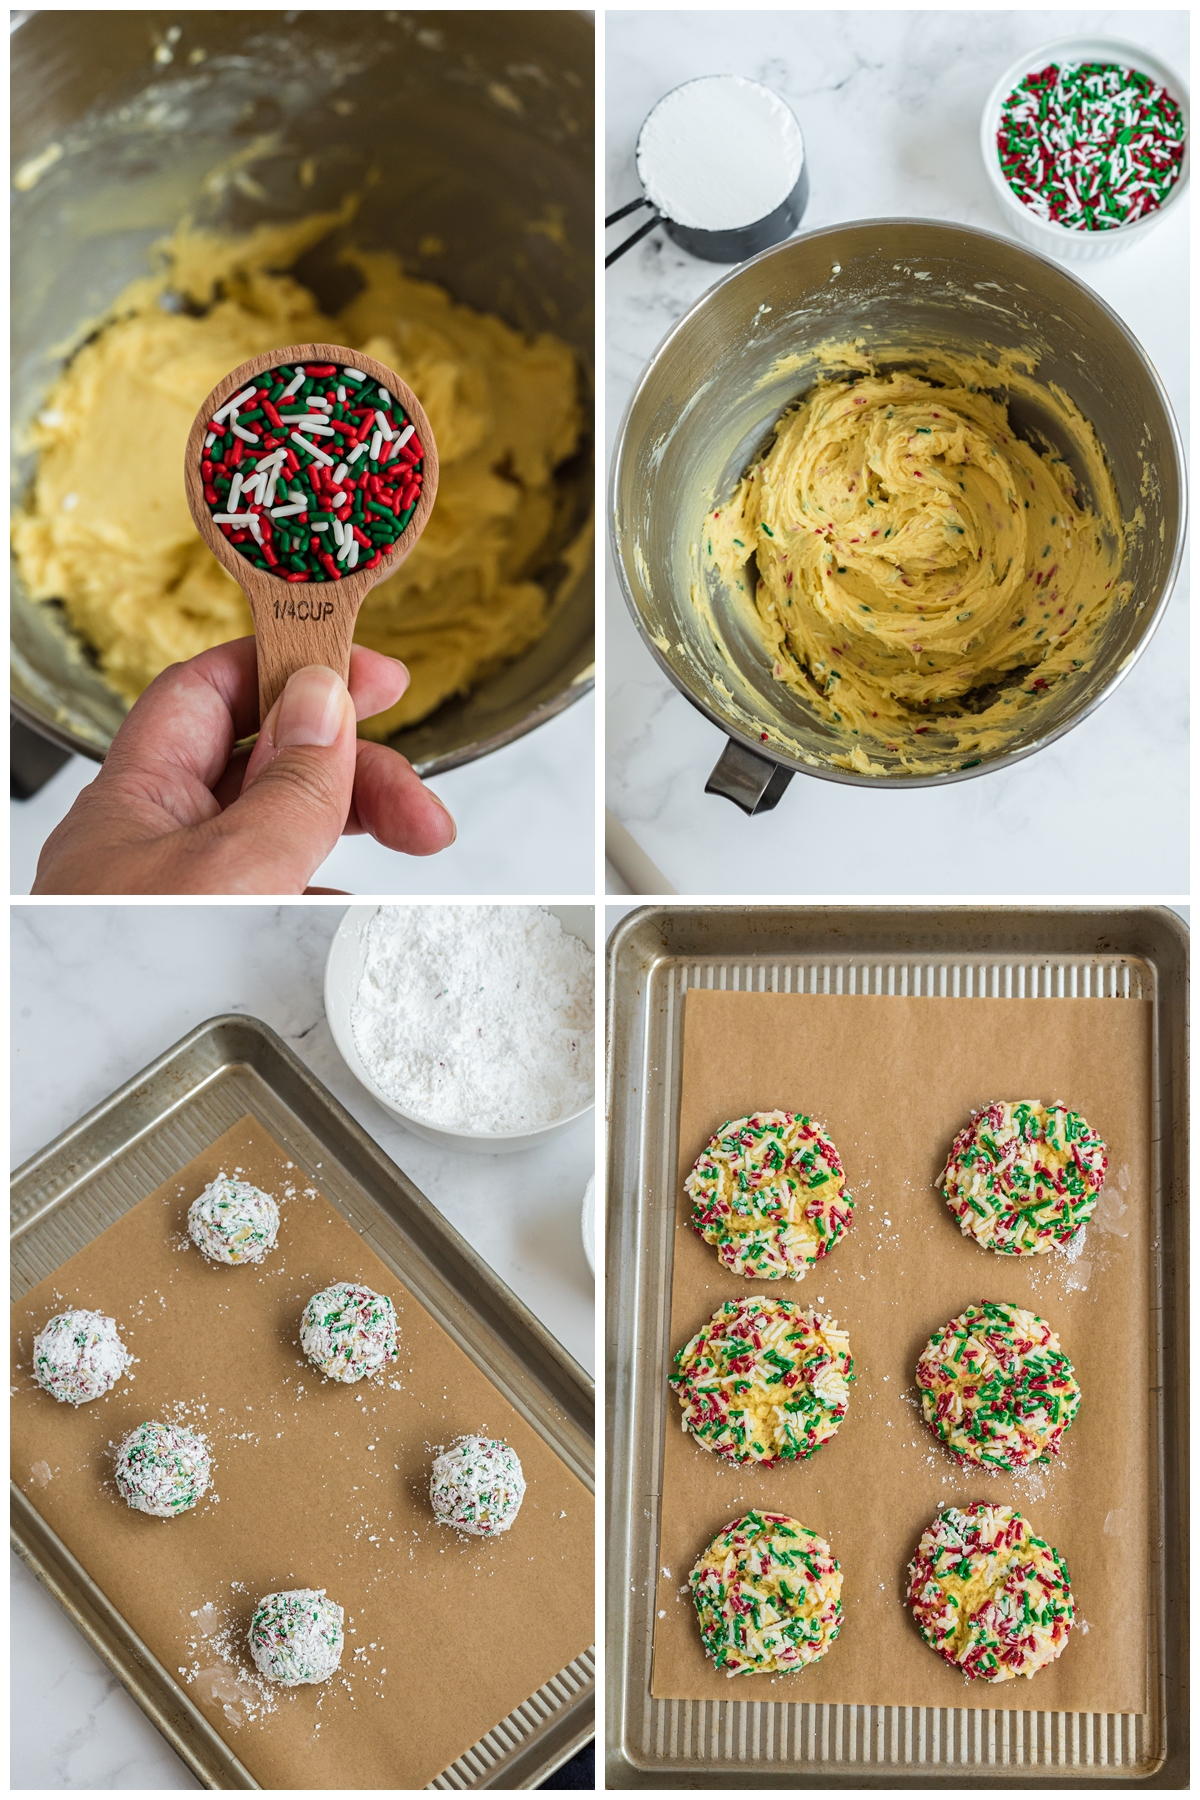 A photo grid process of preparing Ooey Gooey Butter Cookies. Starting off with mixing all ingredients together in a bowl and chilling the cookie dough for 30-40 minutes. Then scooping each cookie and putting it on a tray for baking.  